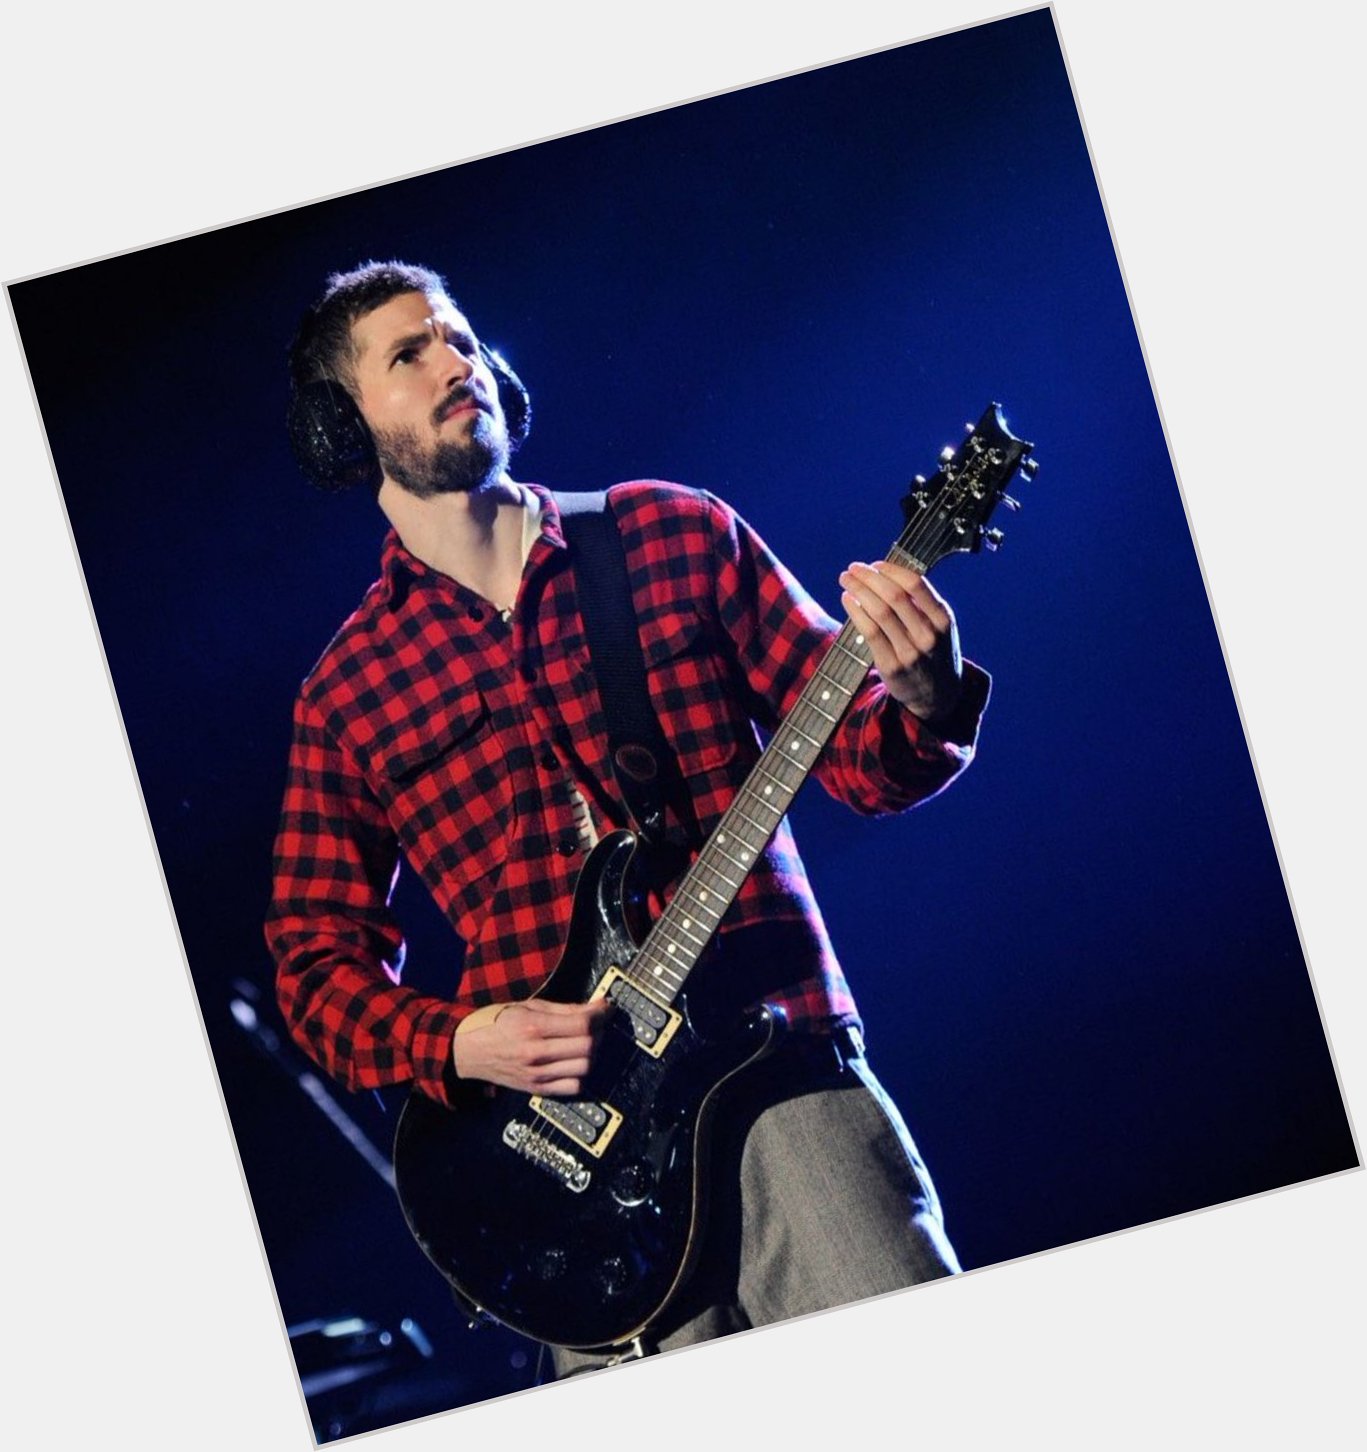 Happy Birthday Brad Delson Would love to see you back with those big headphones...  